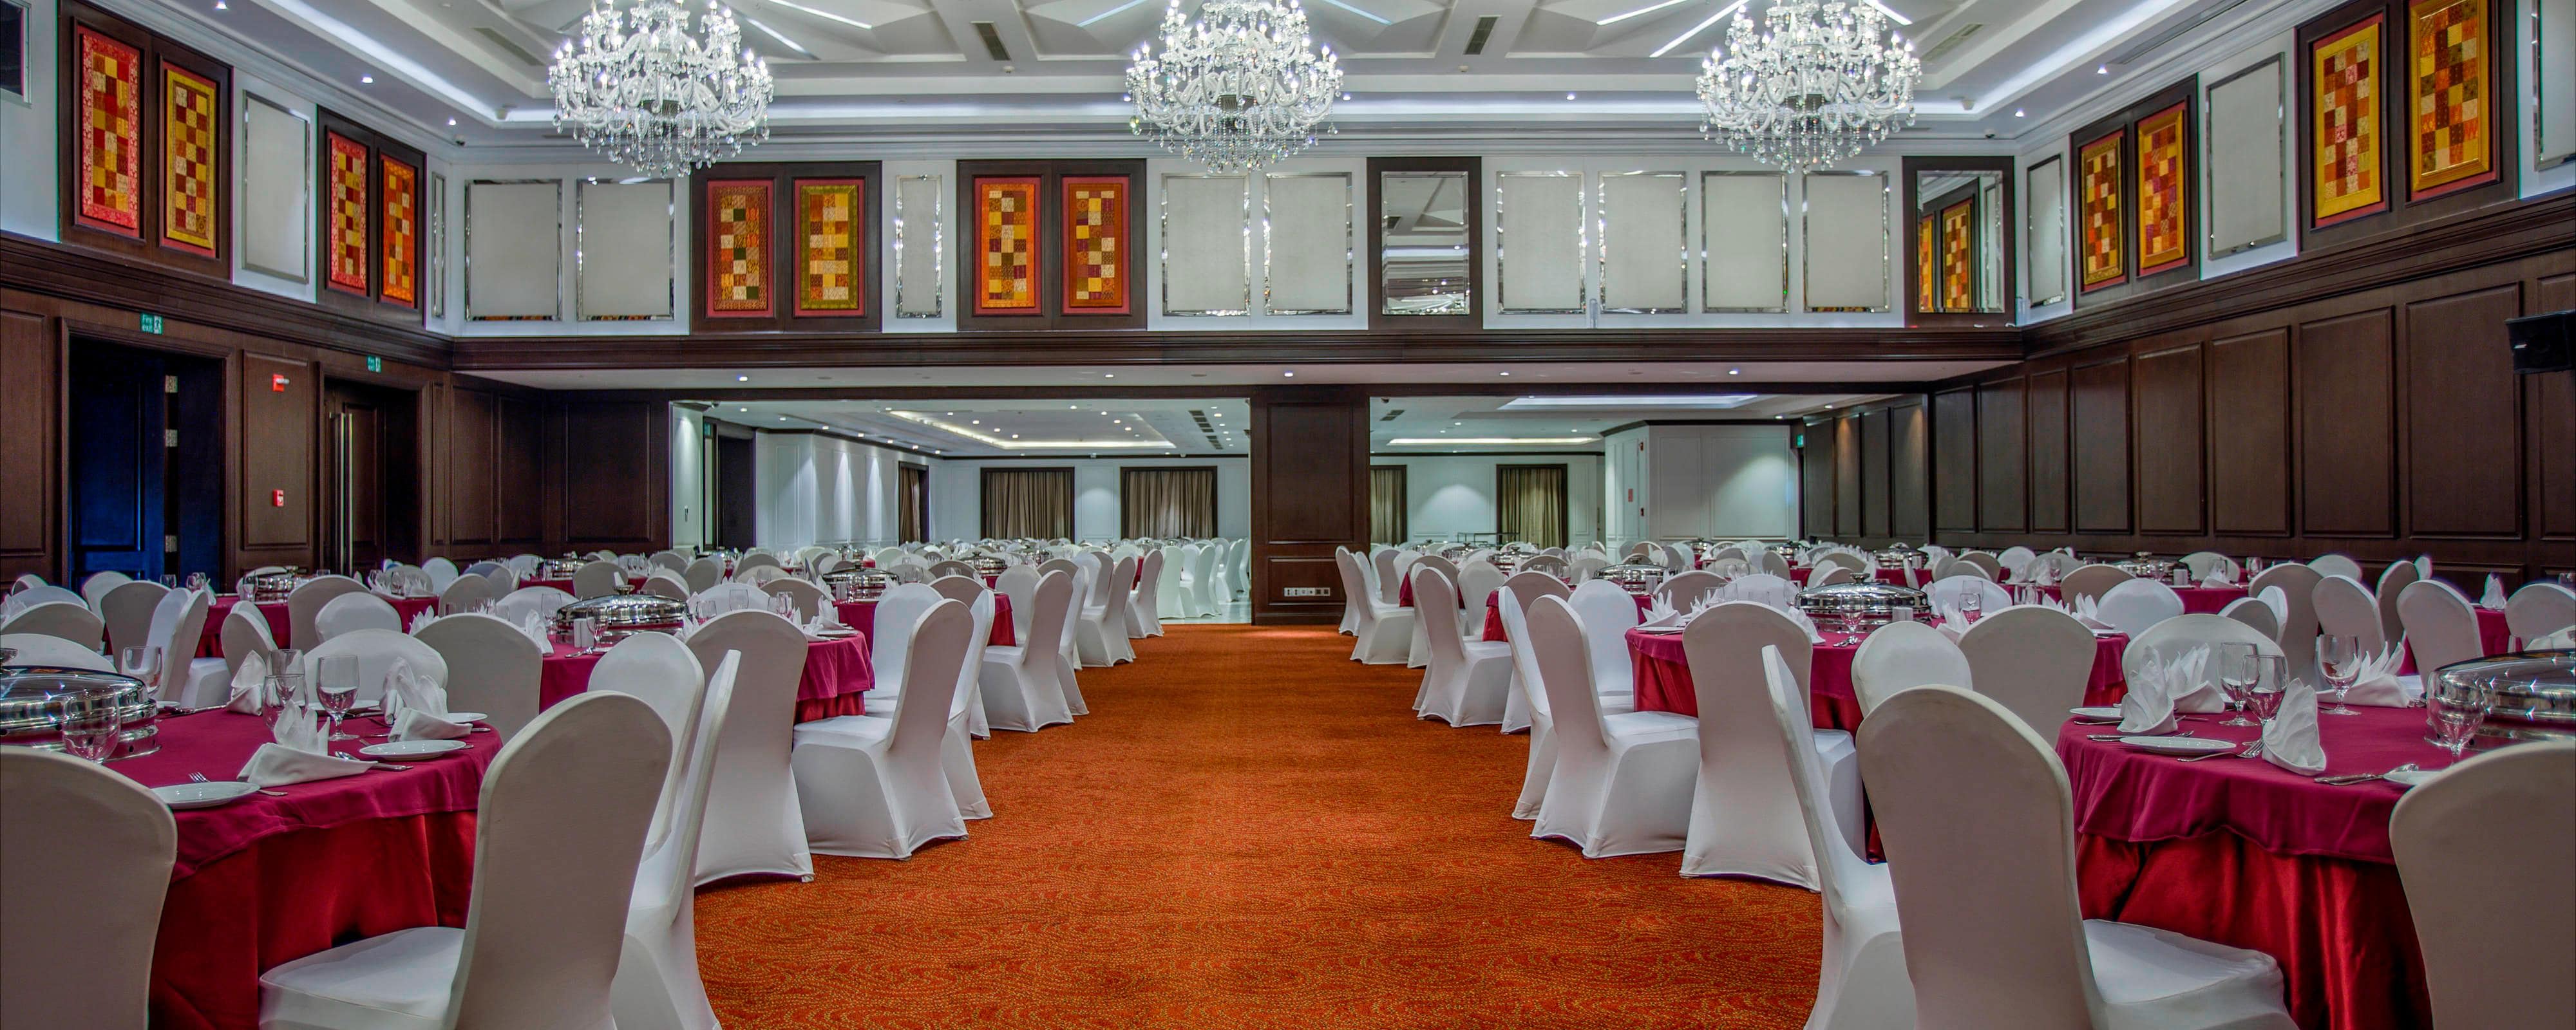 Meeting Space Event Venue In Dhaka